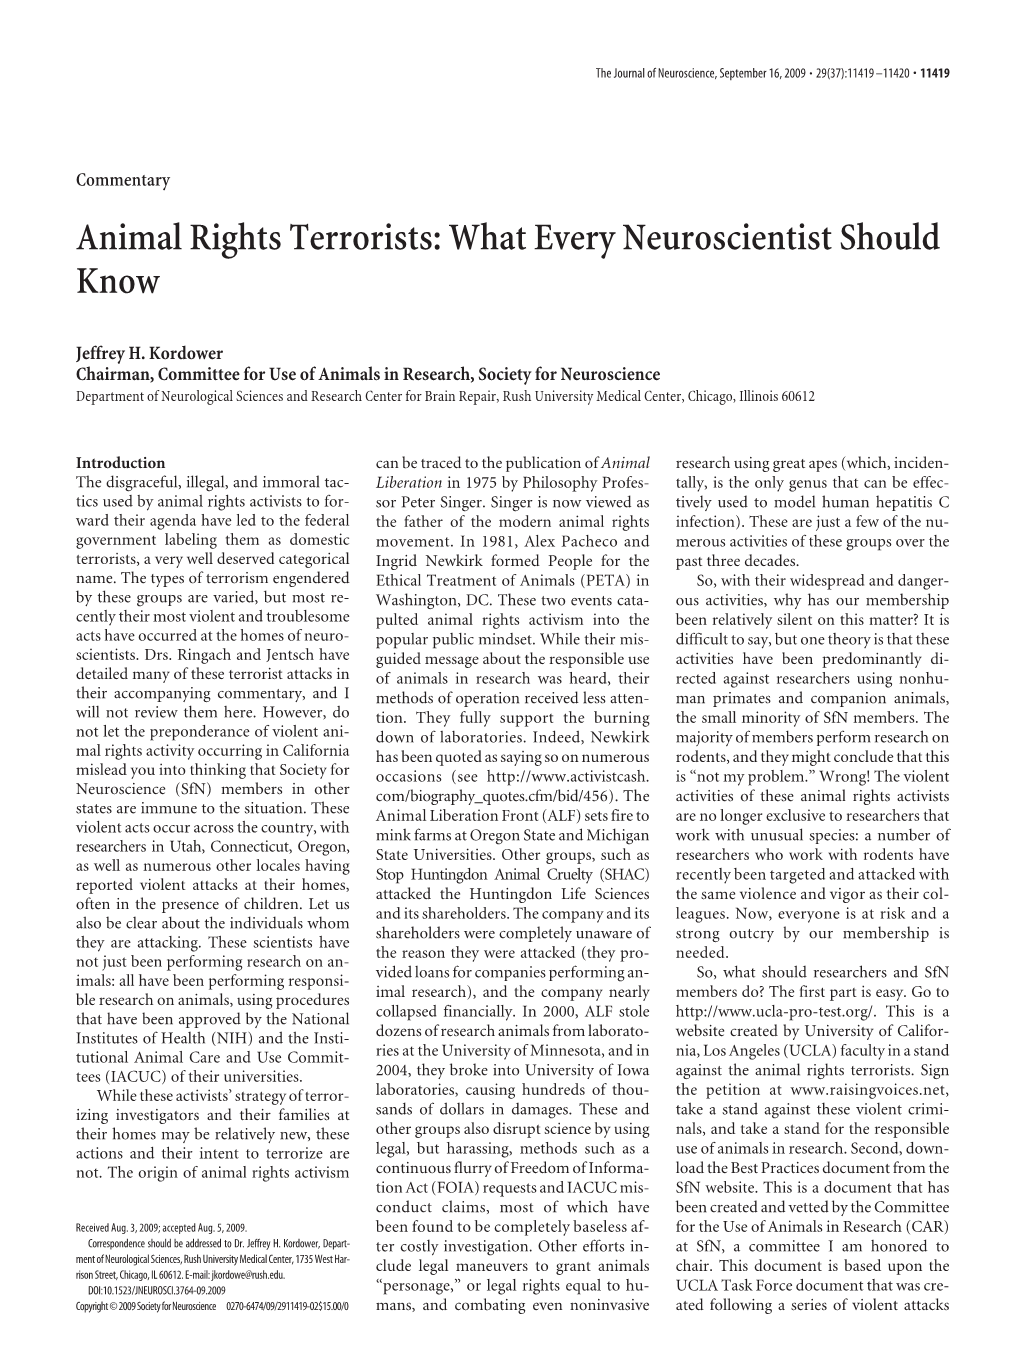 Animal Rights Terrorists: What Every Neuroscientist Should Know